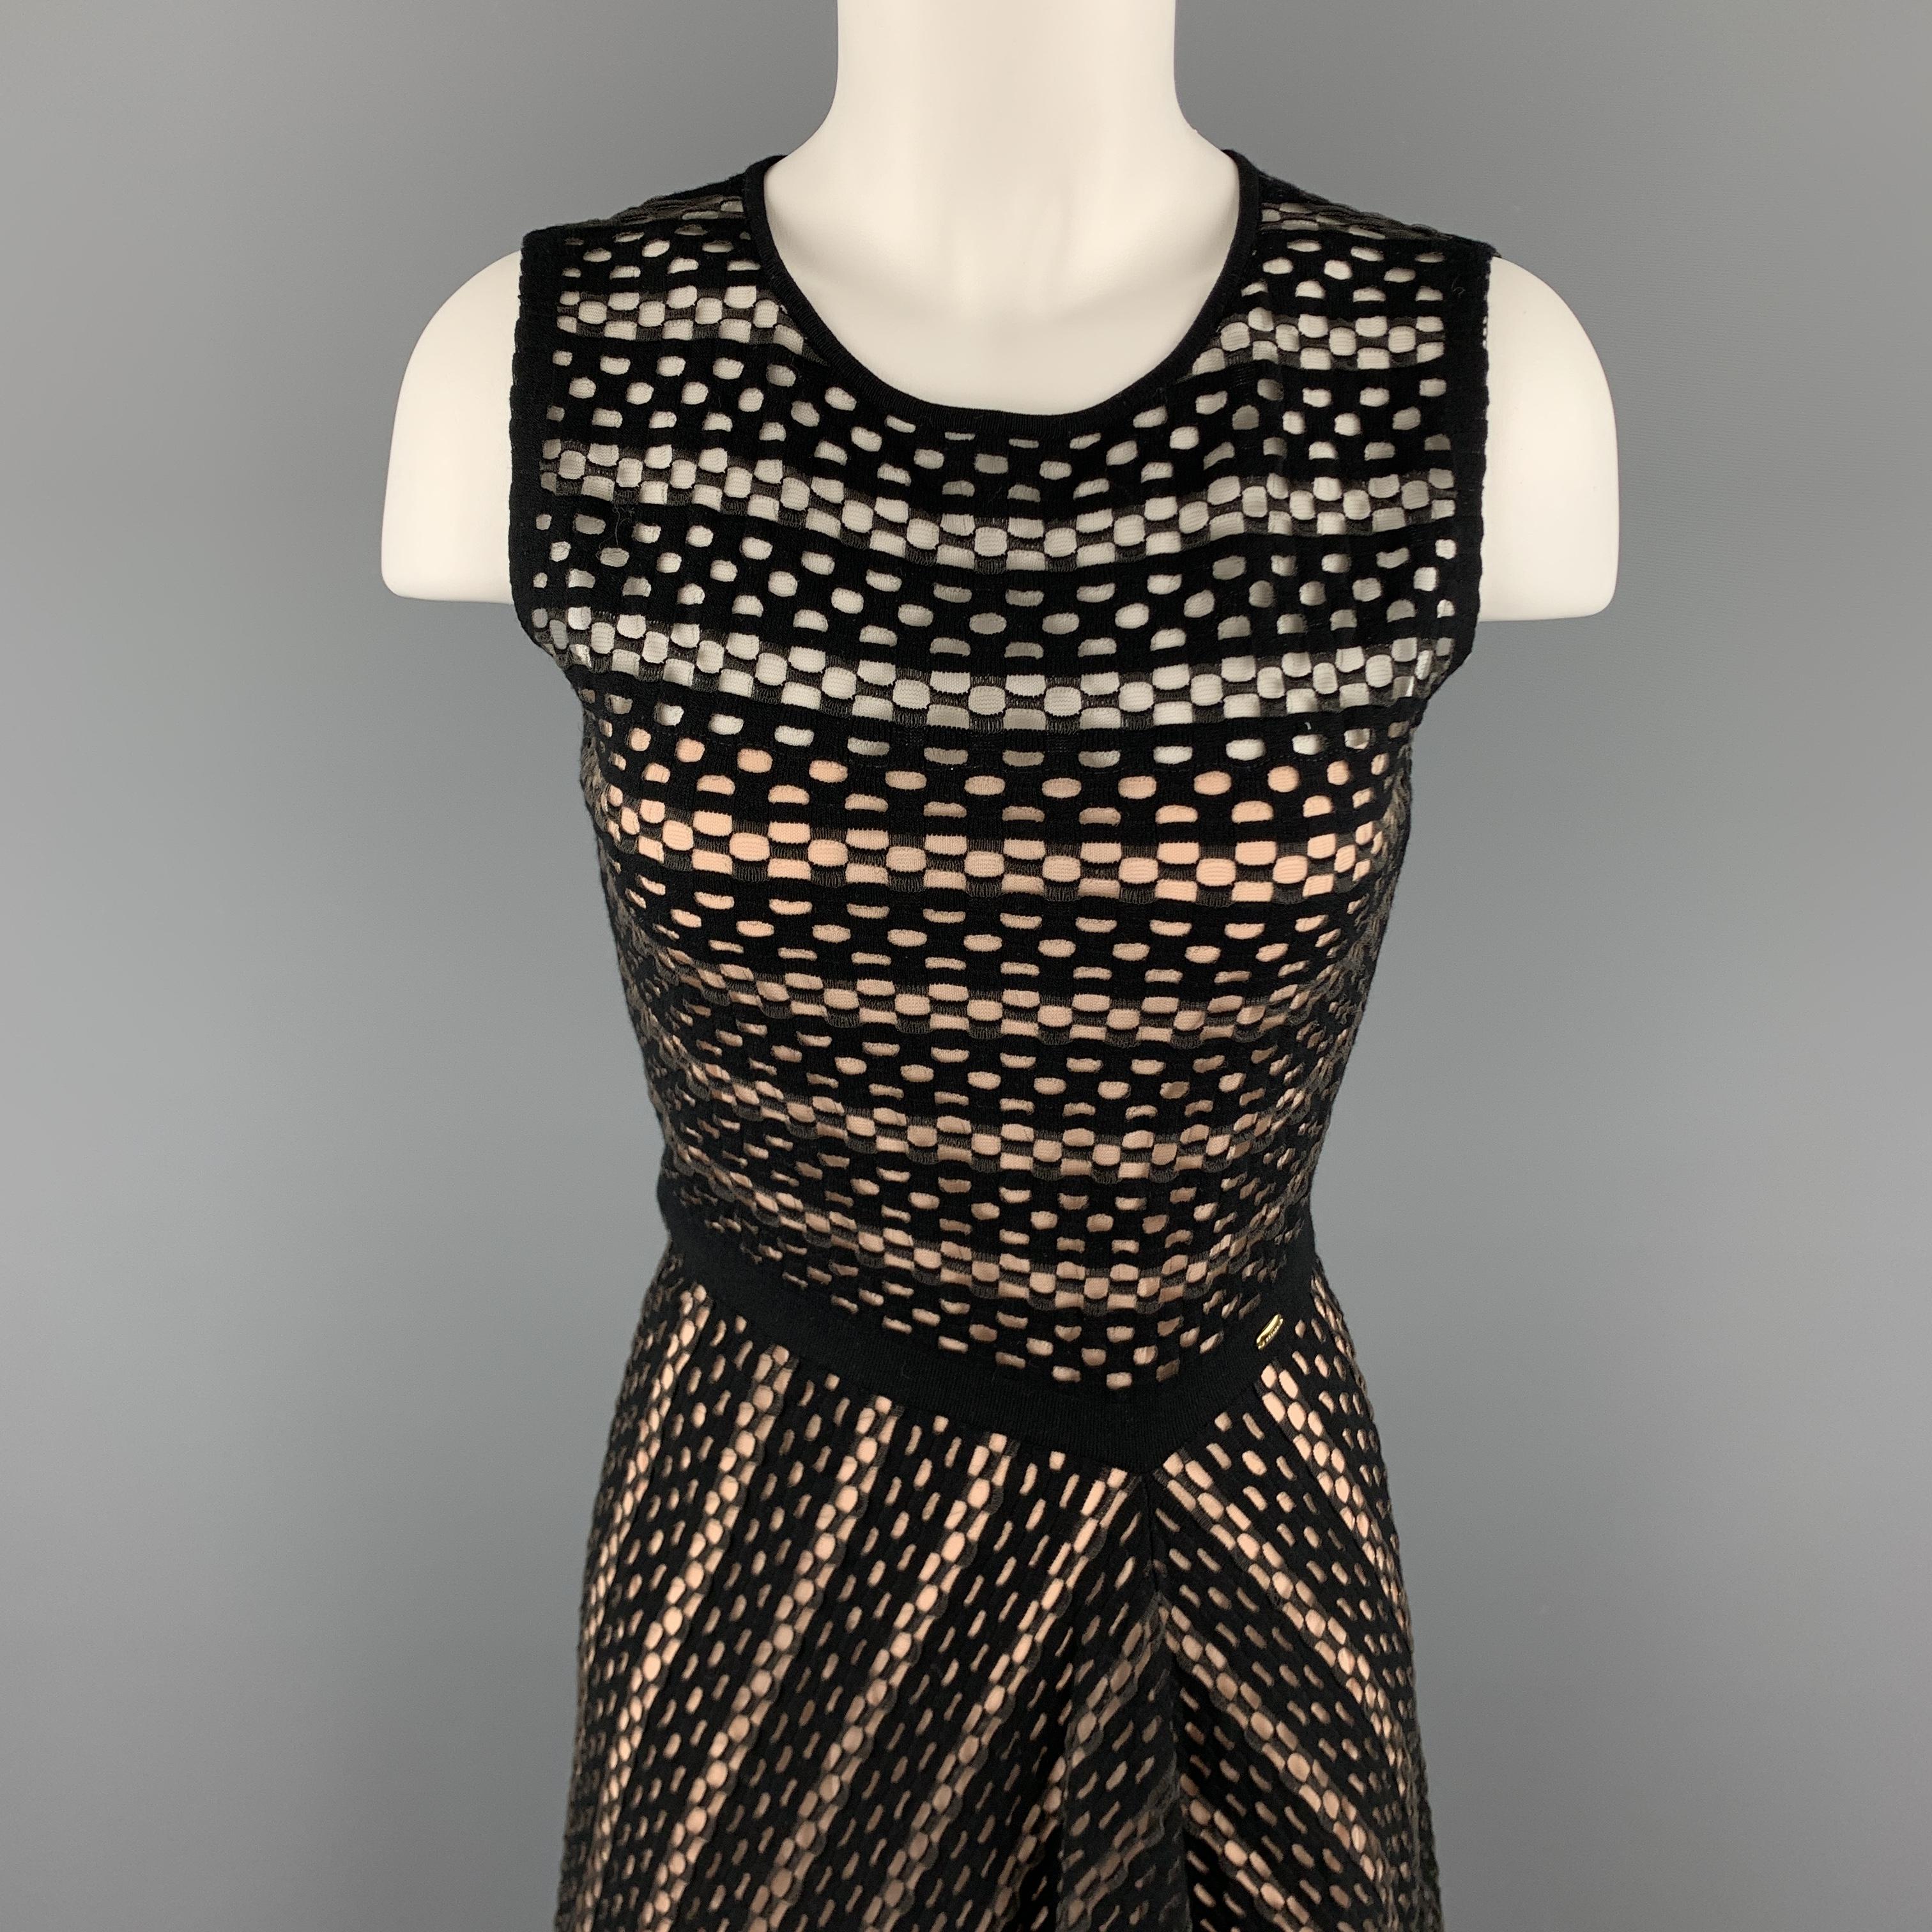 ESCADA sleeveless dress comes in black and grey stretch mesh with a round neckline, and flared skirt. Made in Italy.

Excellent Pre-Owned Condition.
Marked: S

Measurements:

Shoulder: 14 in.
Bust: 34 n.
Waist: 26 in.
Hip: 42 in.
Length: 44 in.